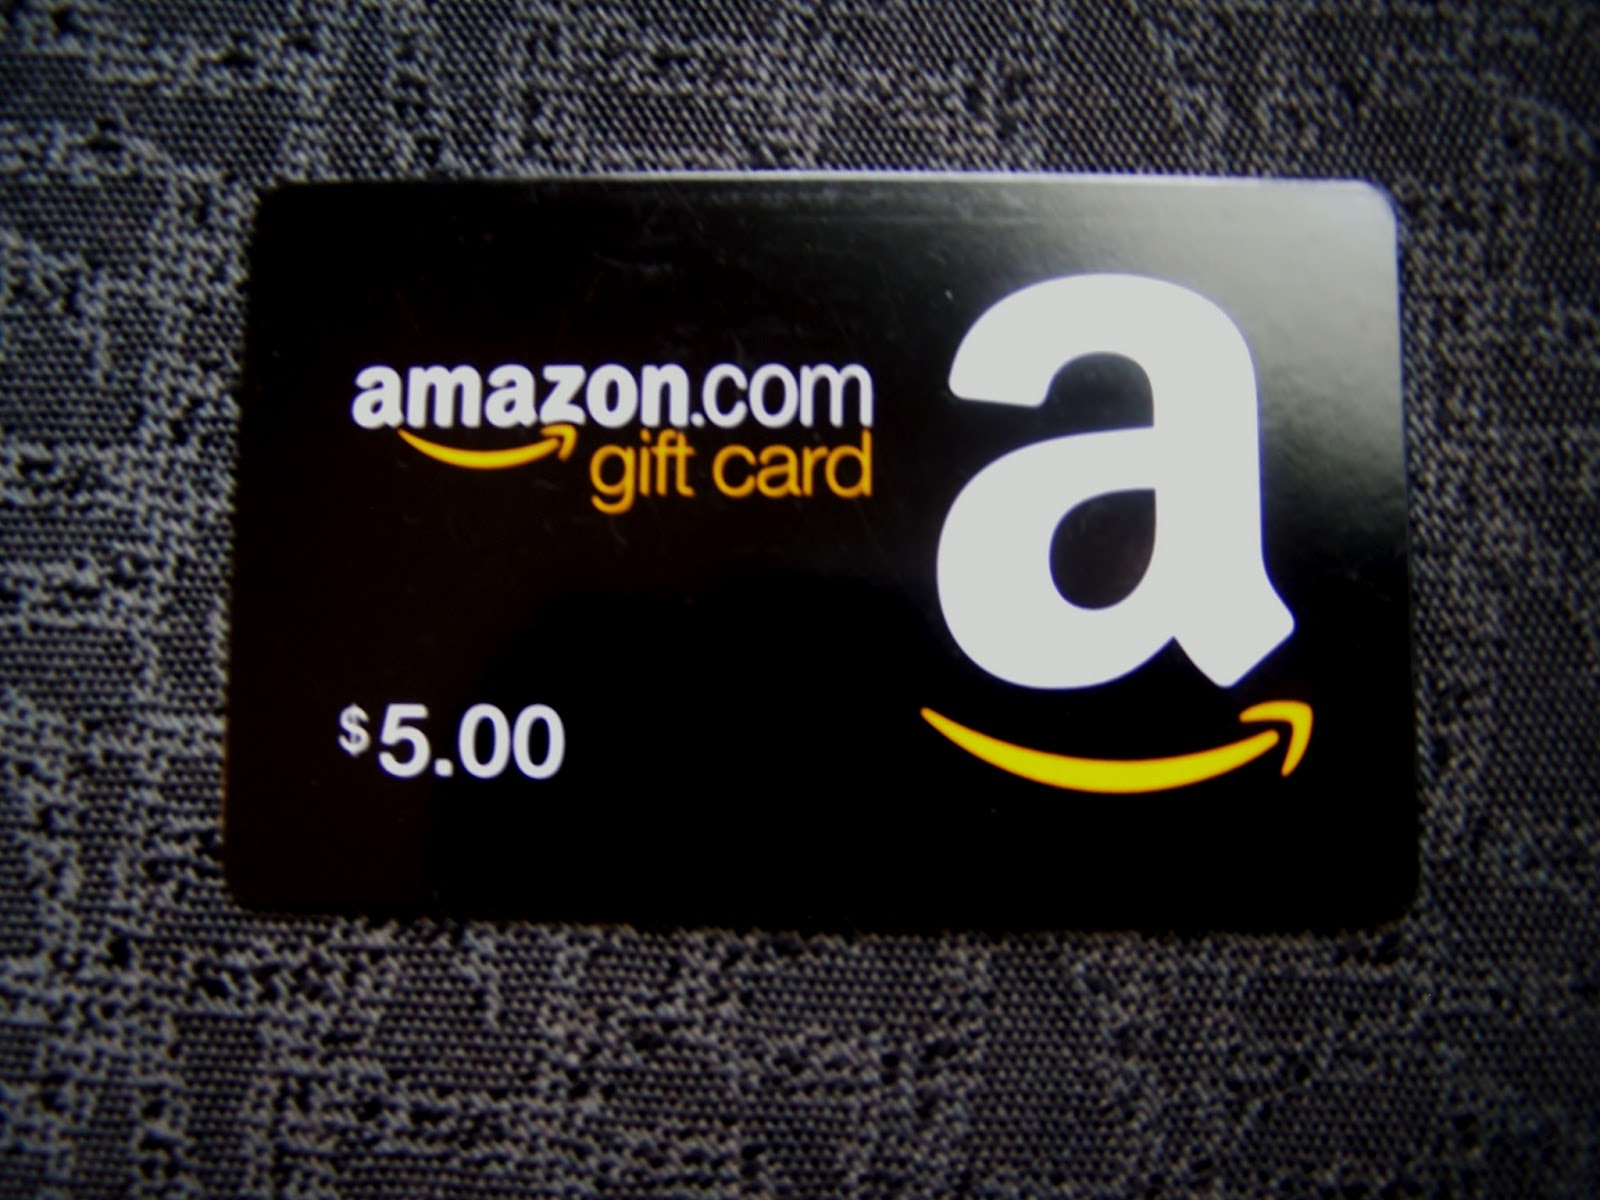 Amazon Gift Card Giveaway!!! and the winner is Skinny GF